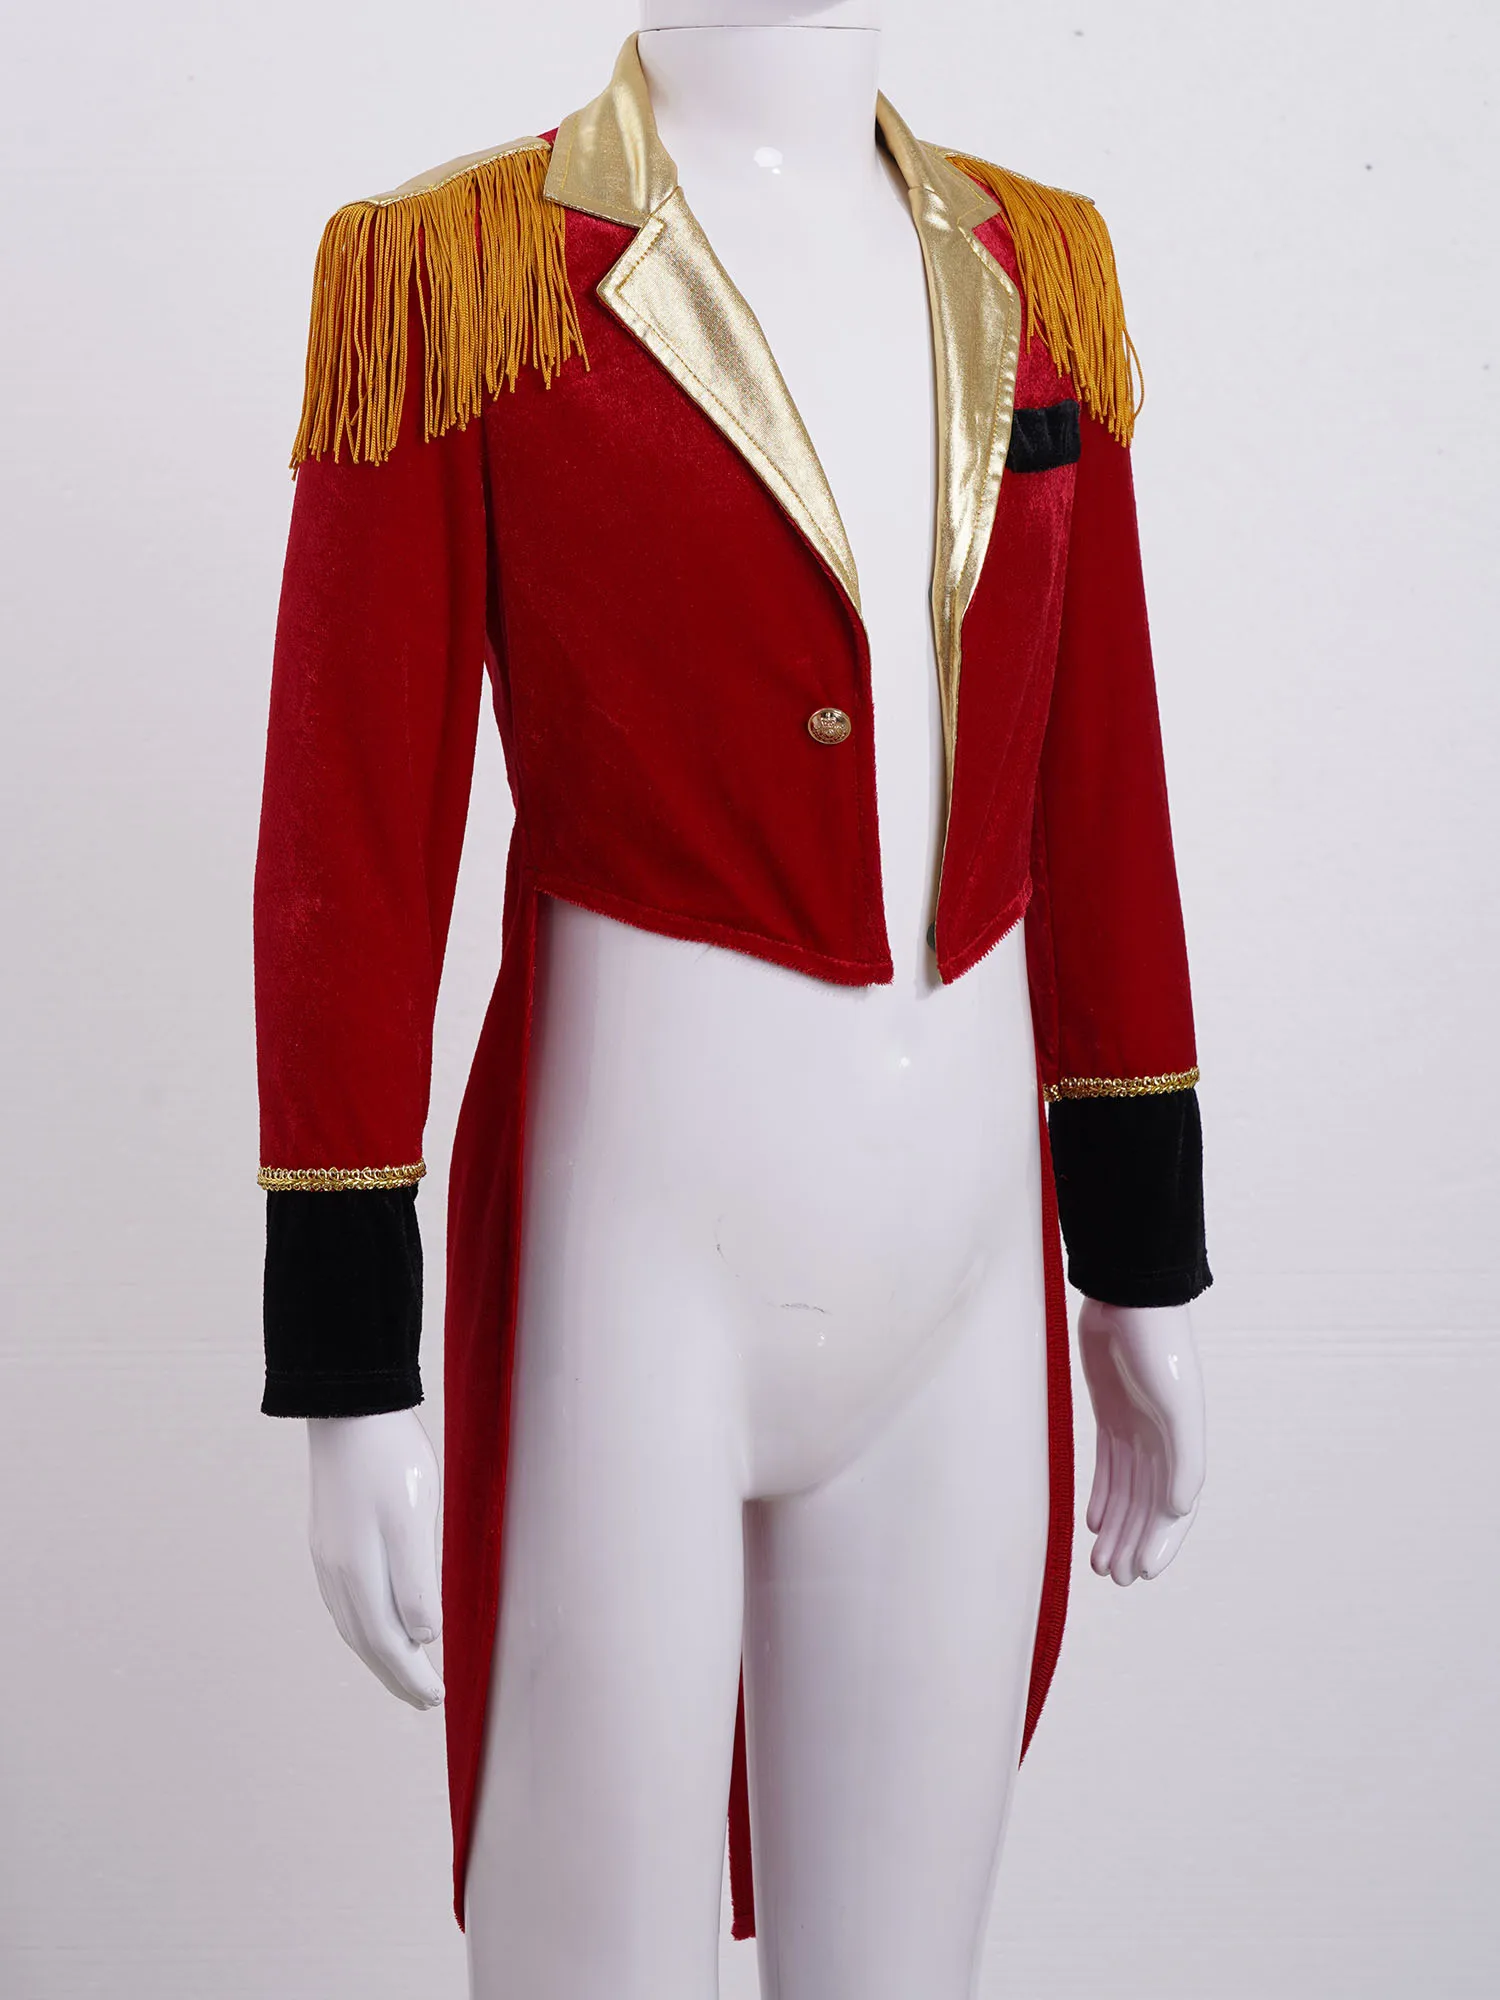 Kids Boy Circus Ringmaster Costumes Lapel Collar Tailcoat Jacket Tuxedo Coat Outfit Long Sleeves Tassels Showman Cosplay Uniform Anime Costumes